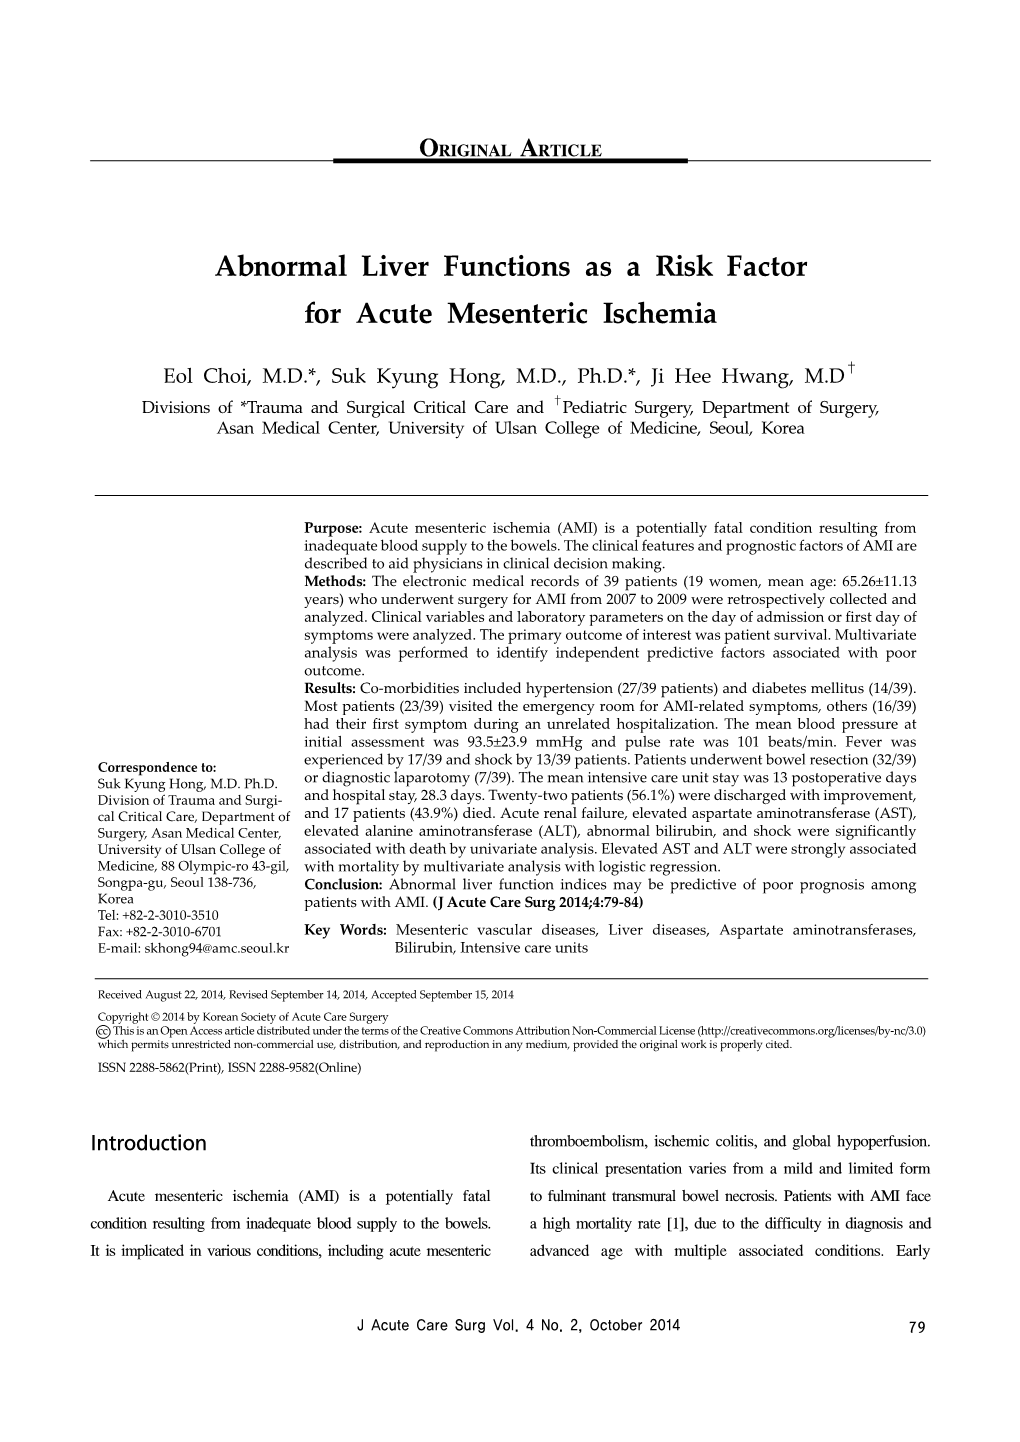 Abnormal Liver Functions As a Risk Factor for Acute Mesenteric Ischemia